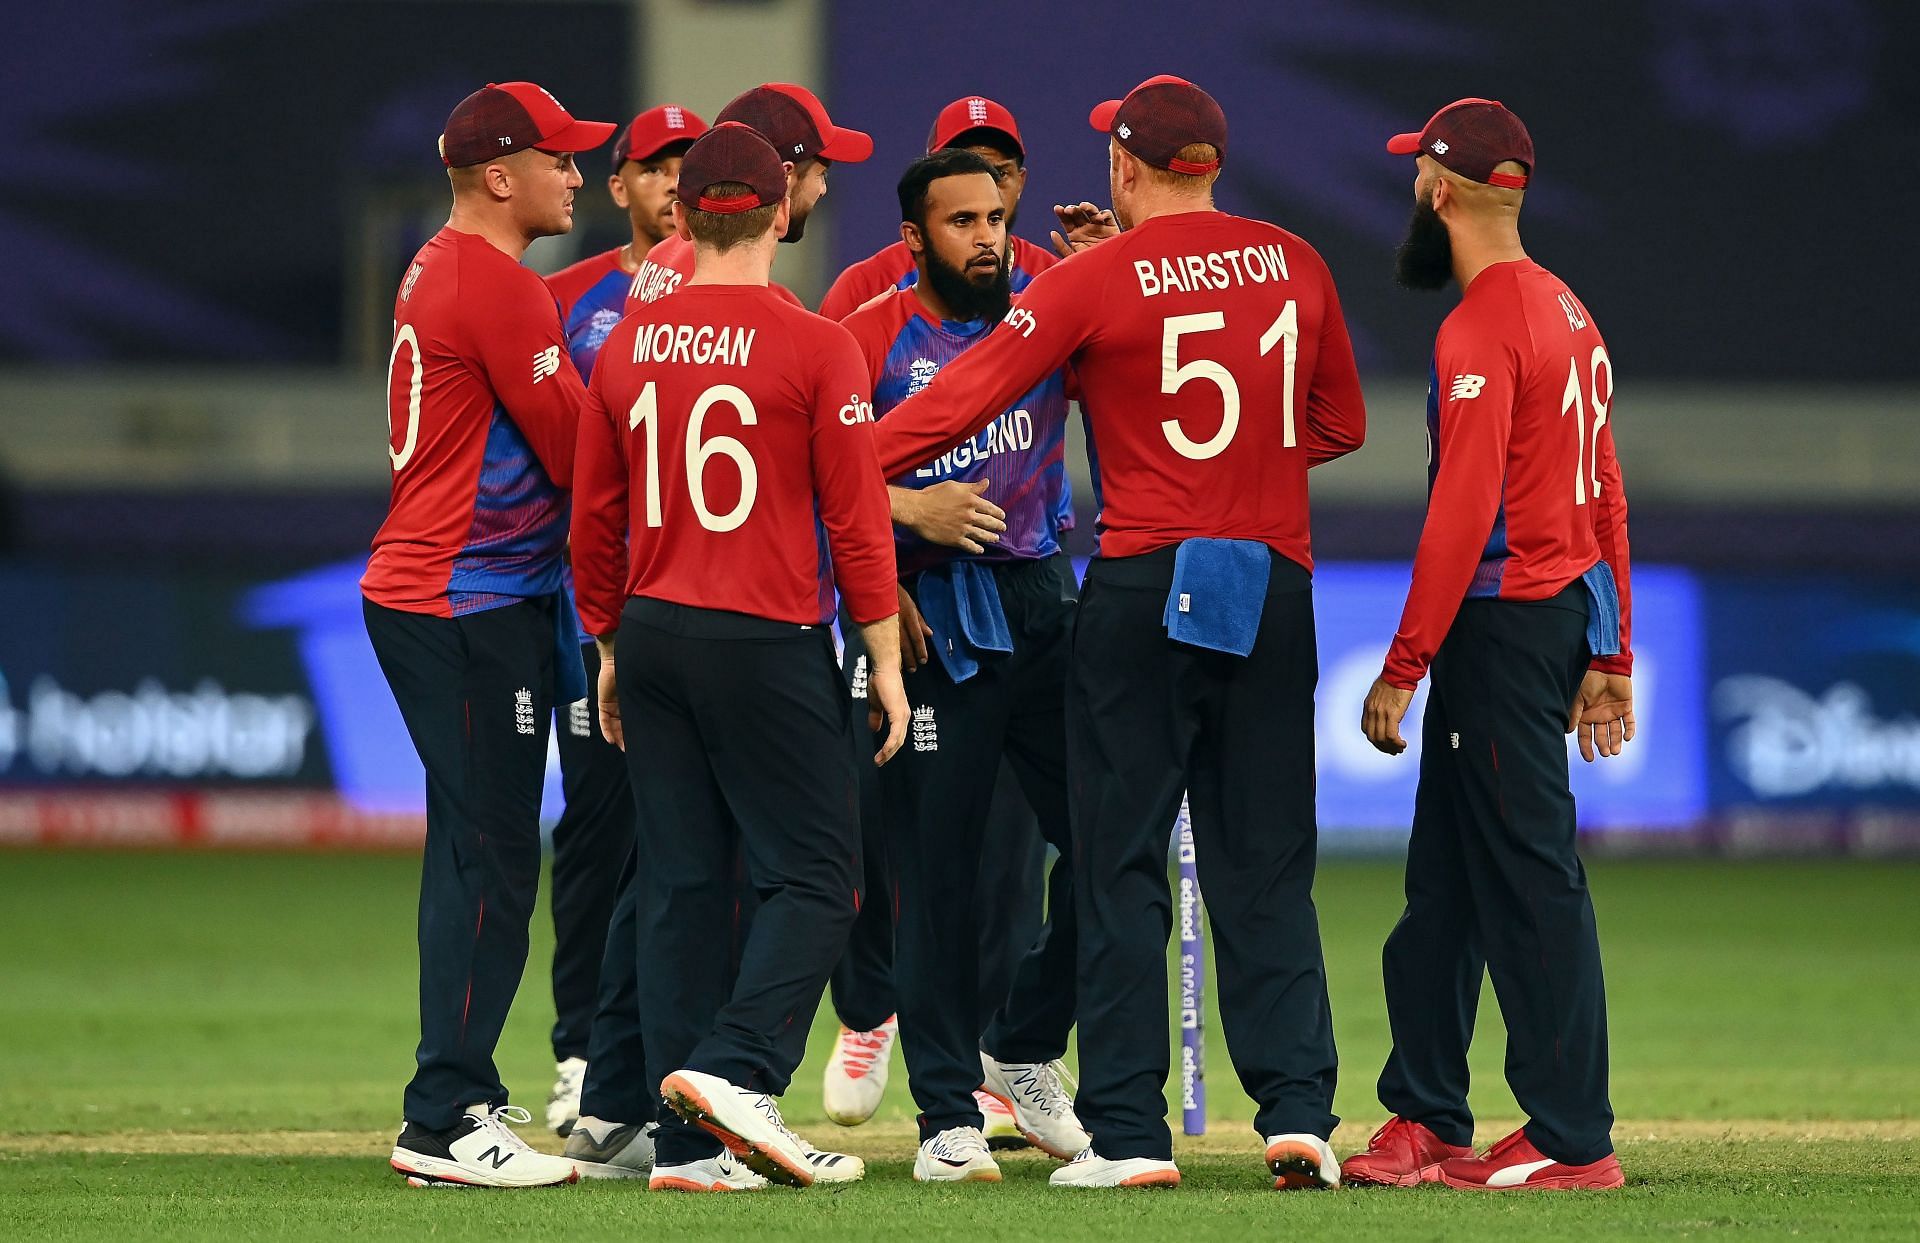 English team celebrating the fall of a wicket against West Indies